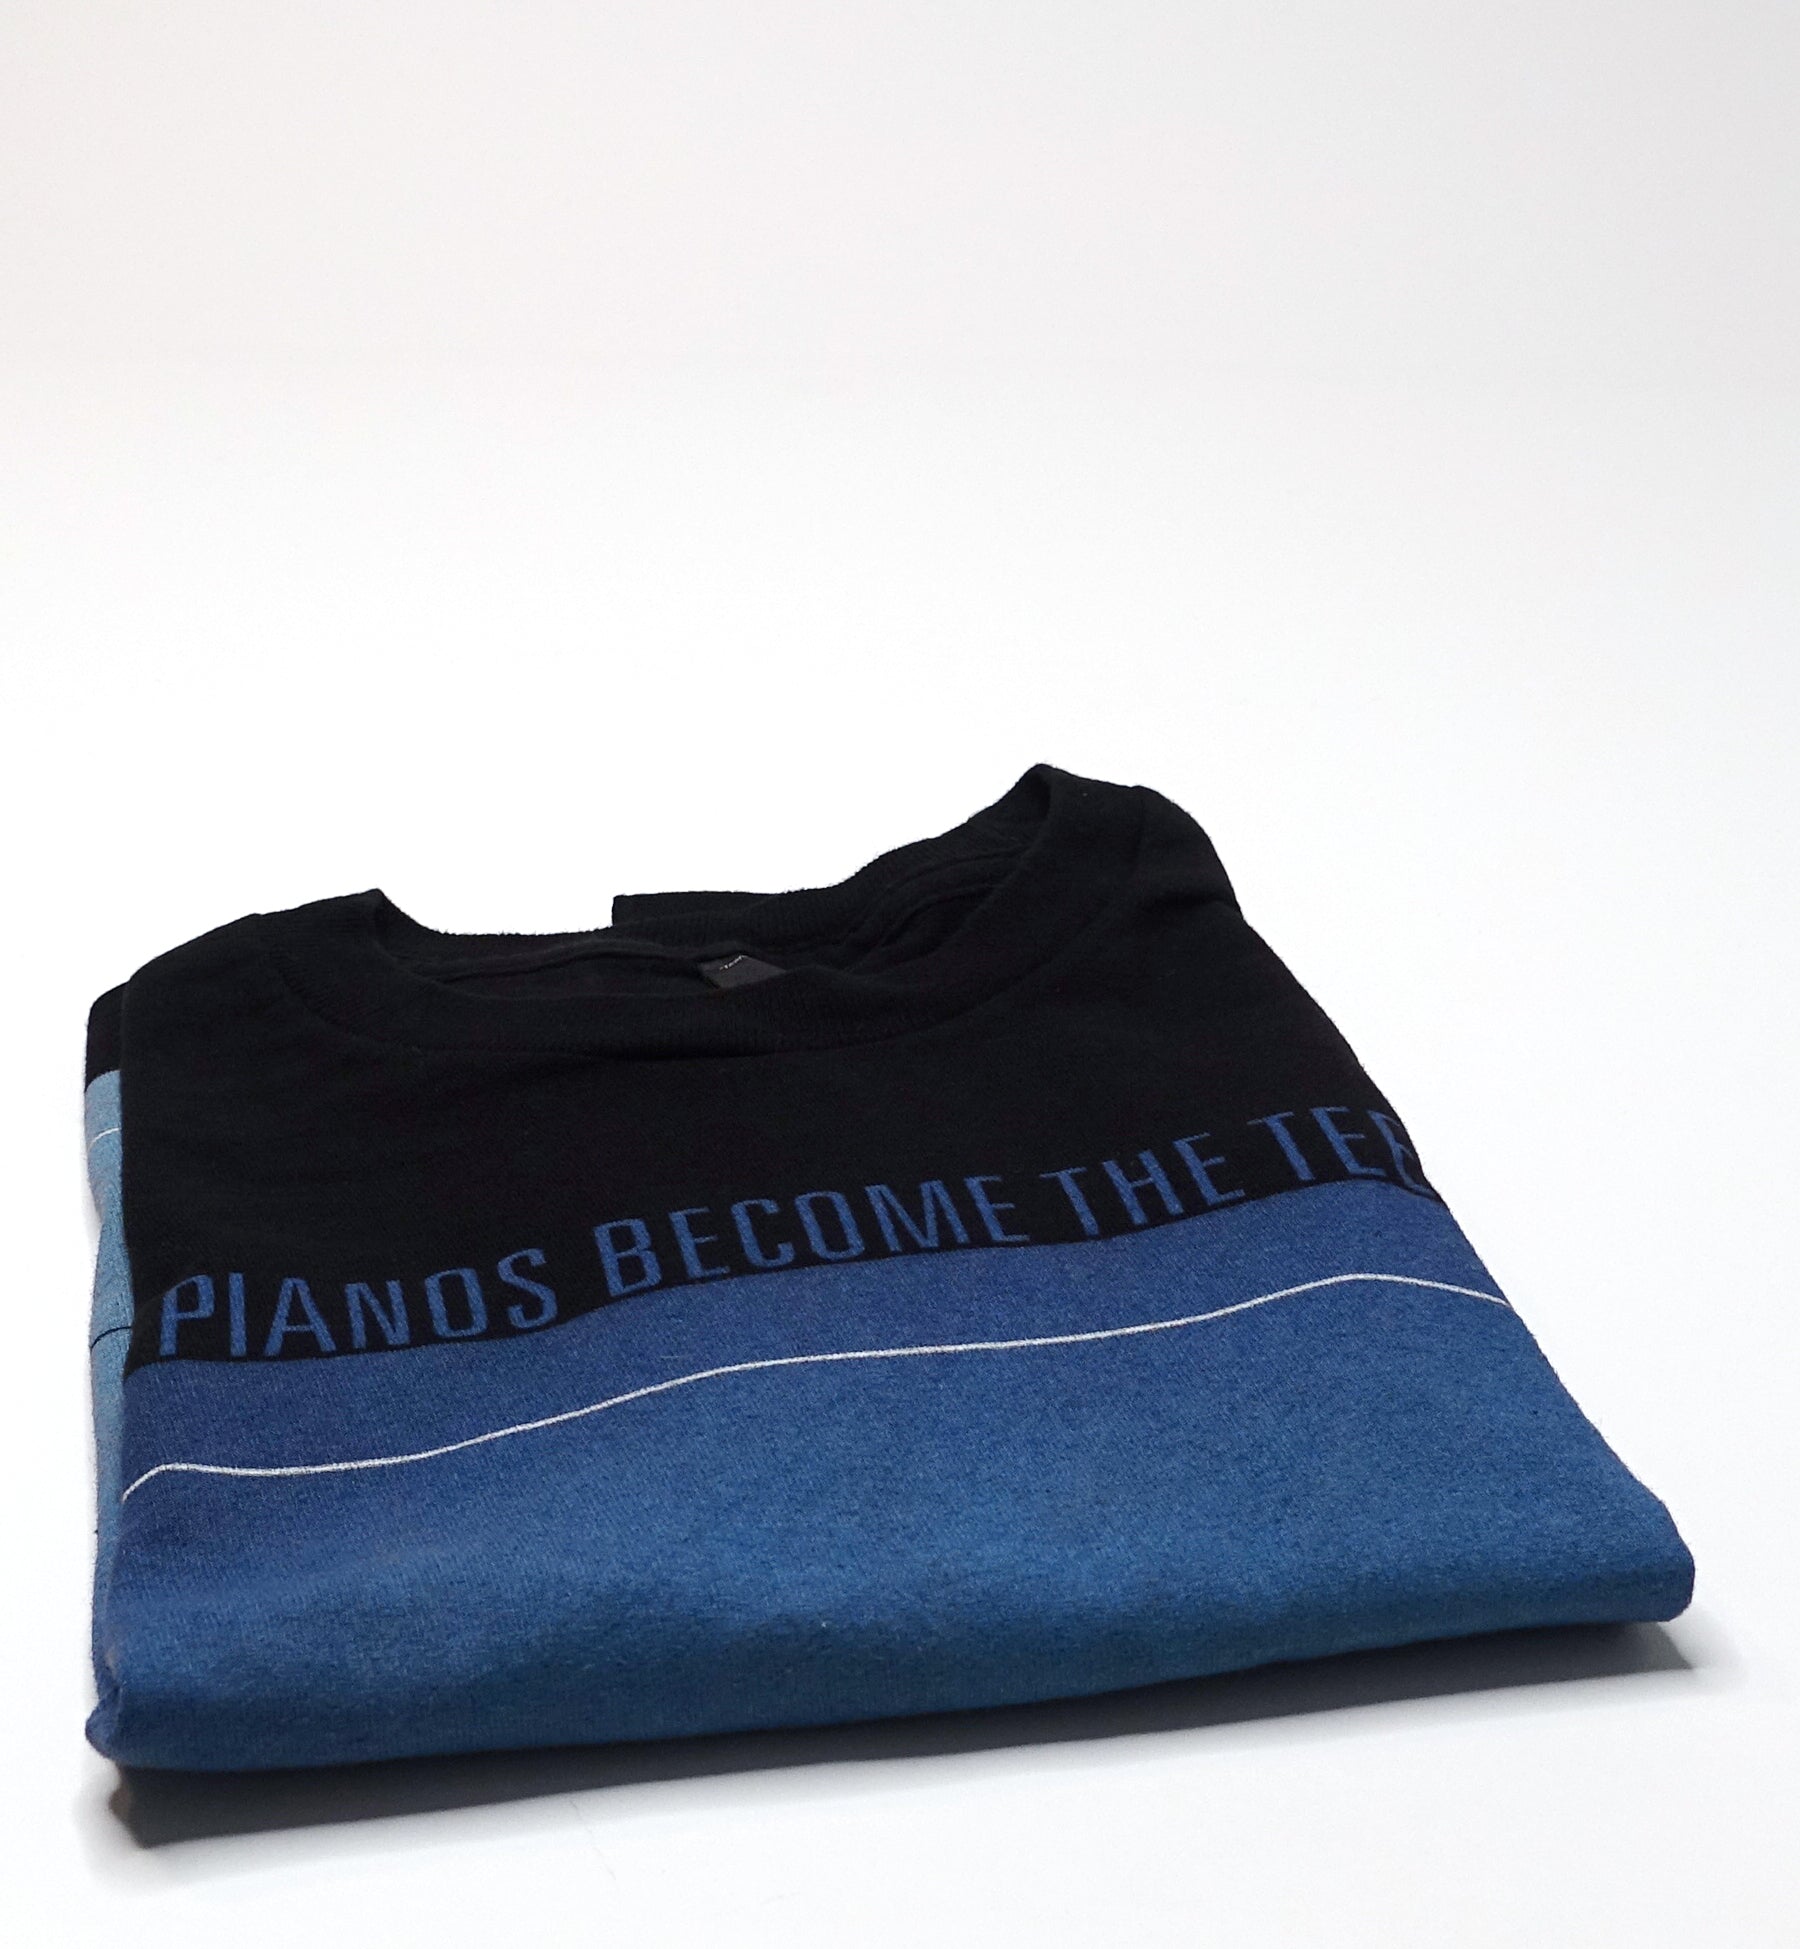 Pianos Become The Teeth - Close 2015 Tour Shirt Size Small